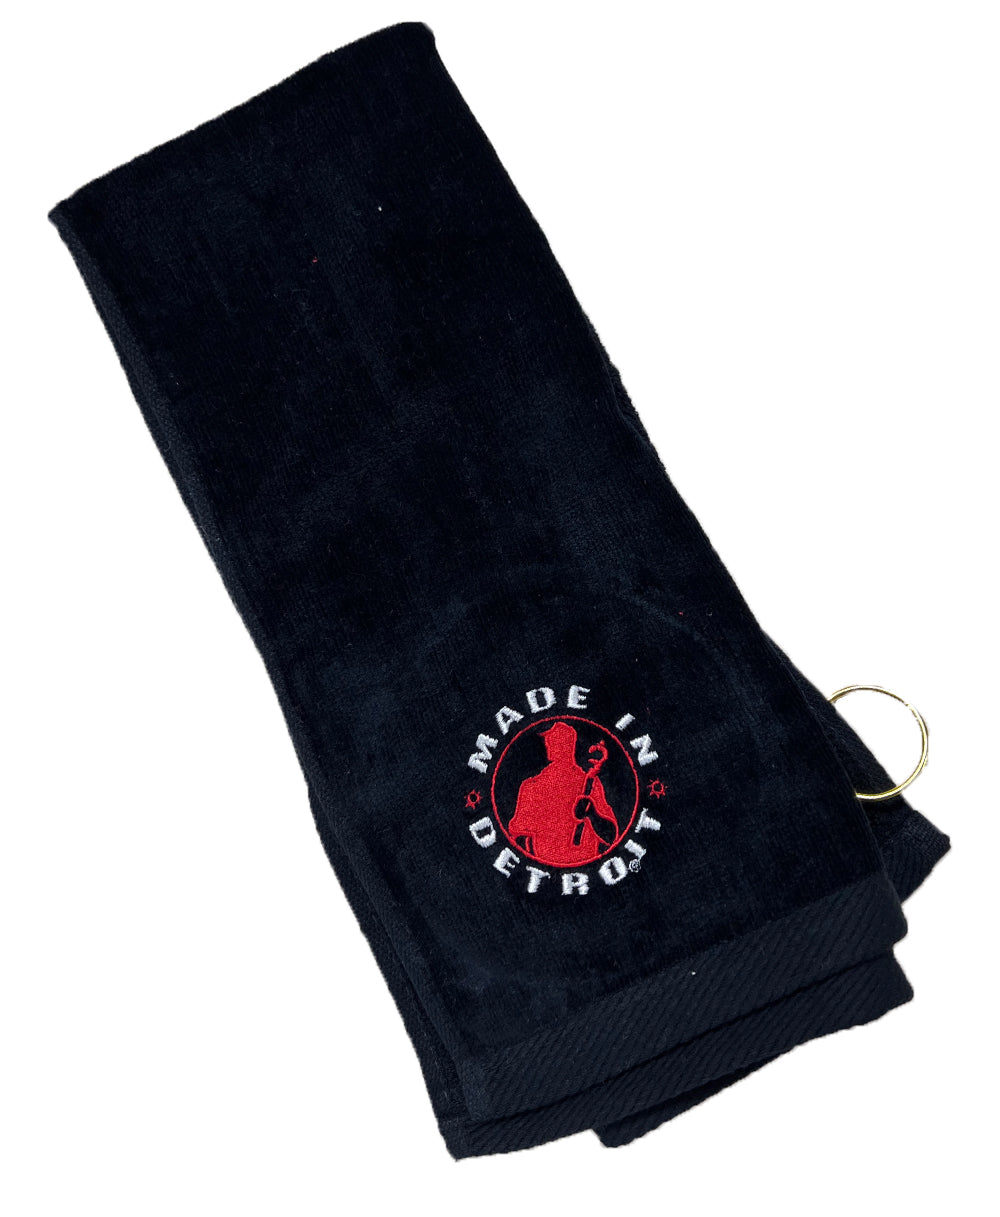 MID Deluxe Golf Towel - Various Colors